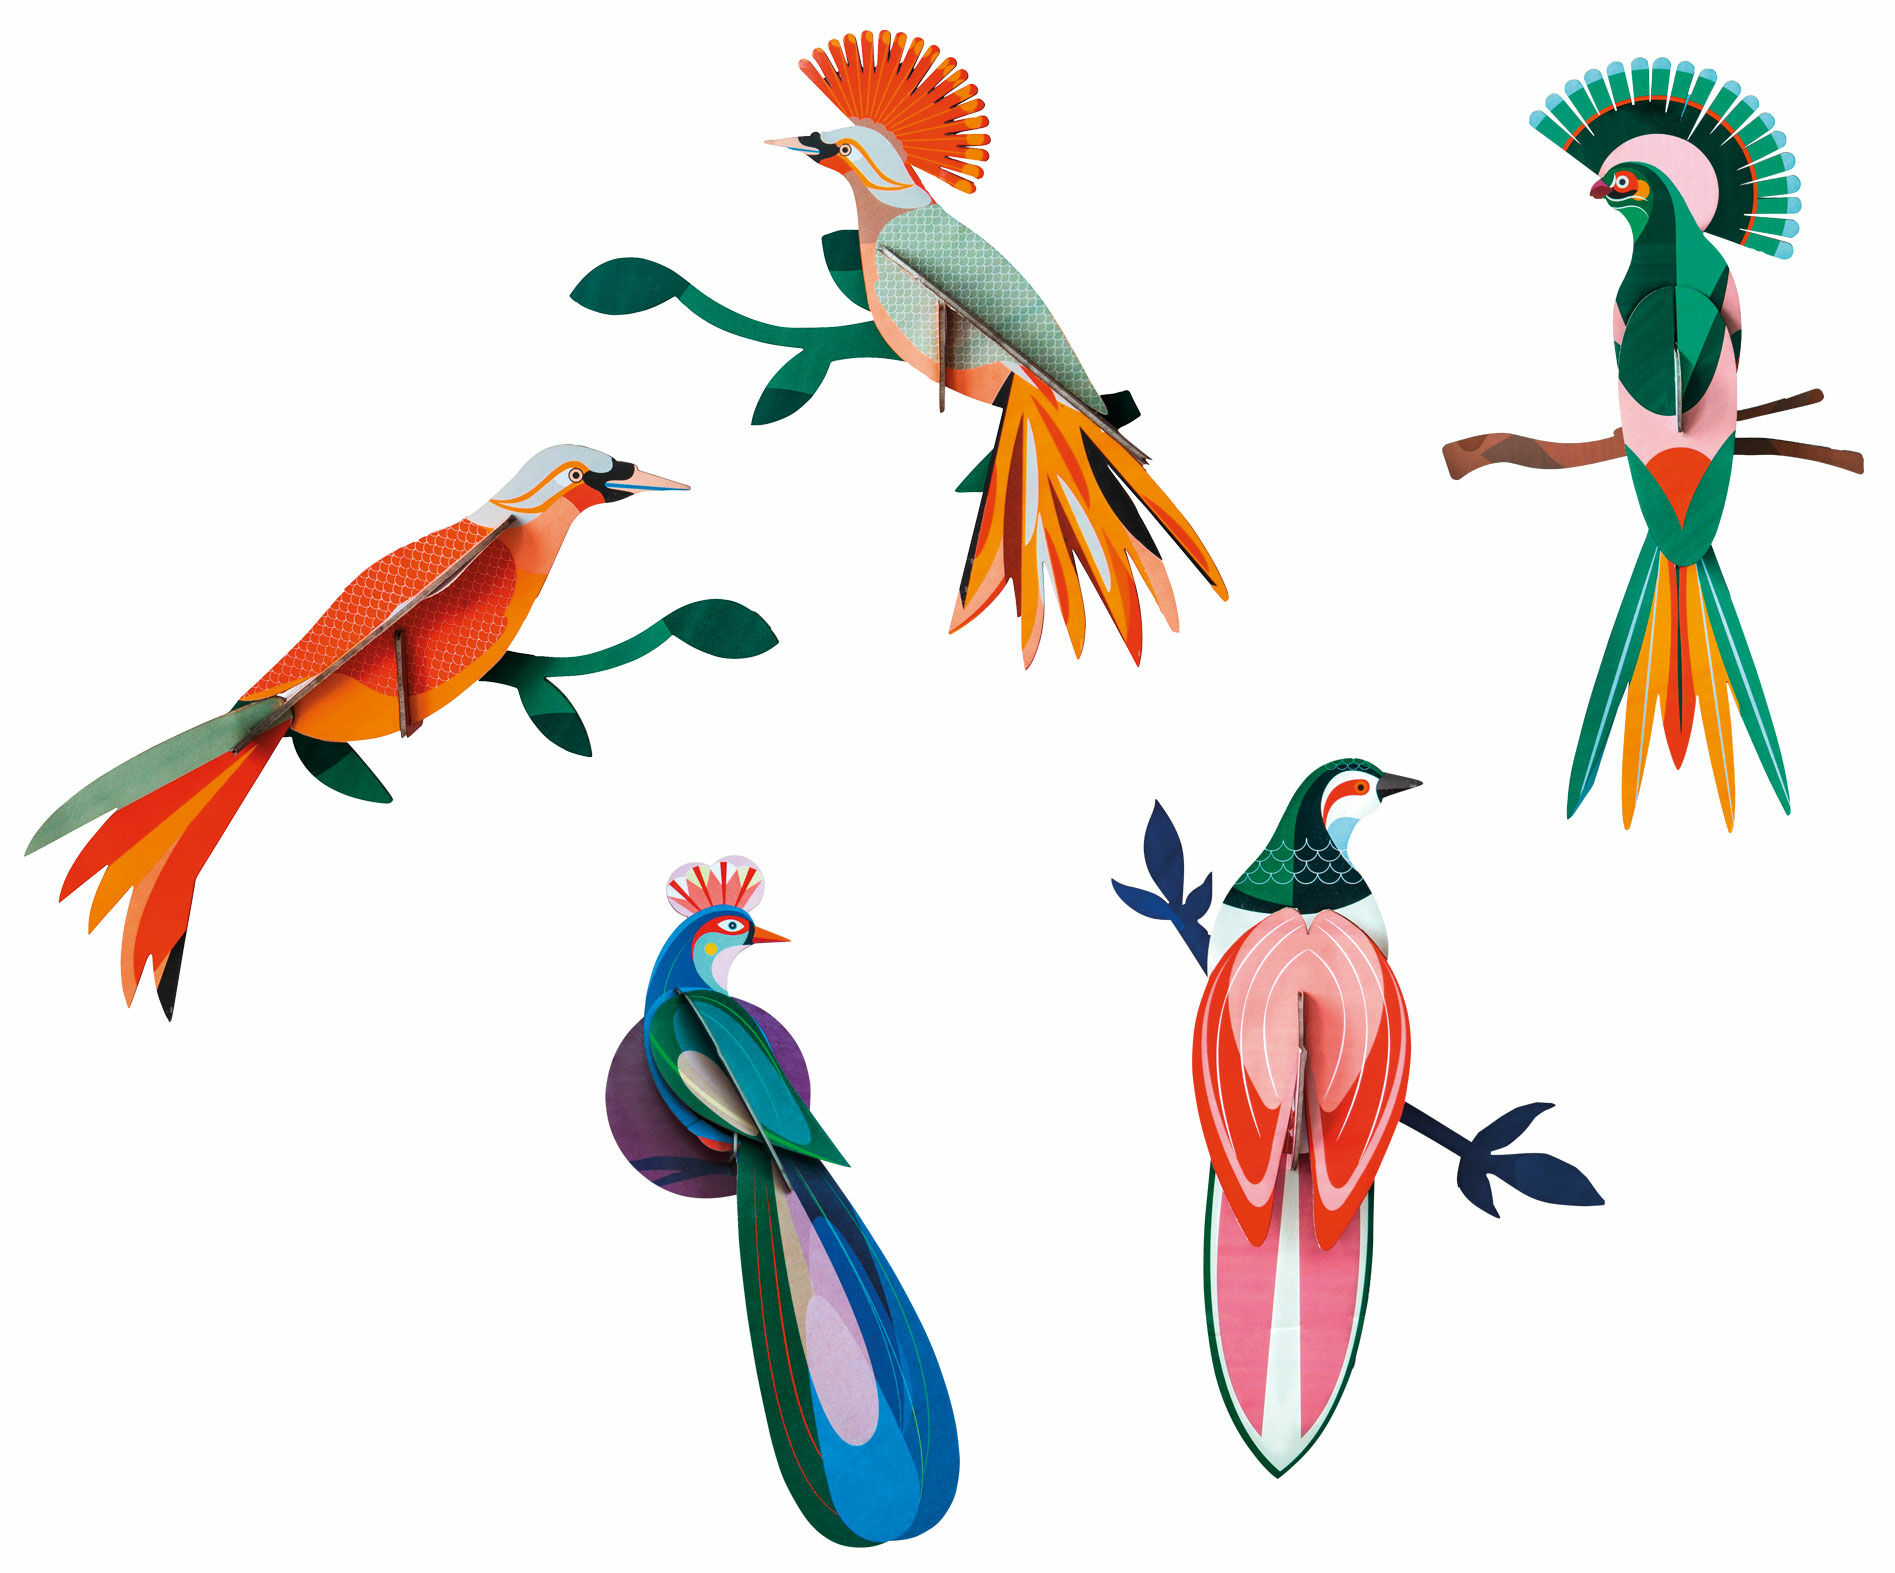 3D wall objects "Birds of Paradise" made of recycled cardboard, DIY, set of 5 by studio ROOF